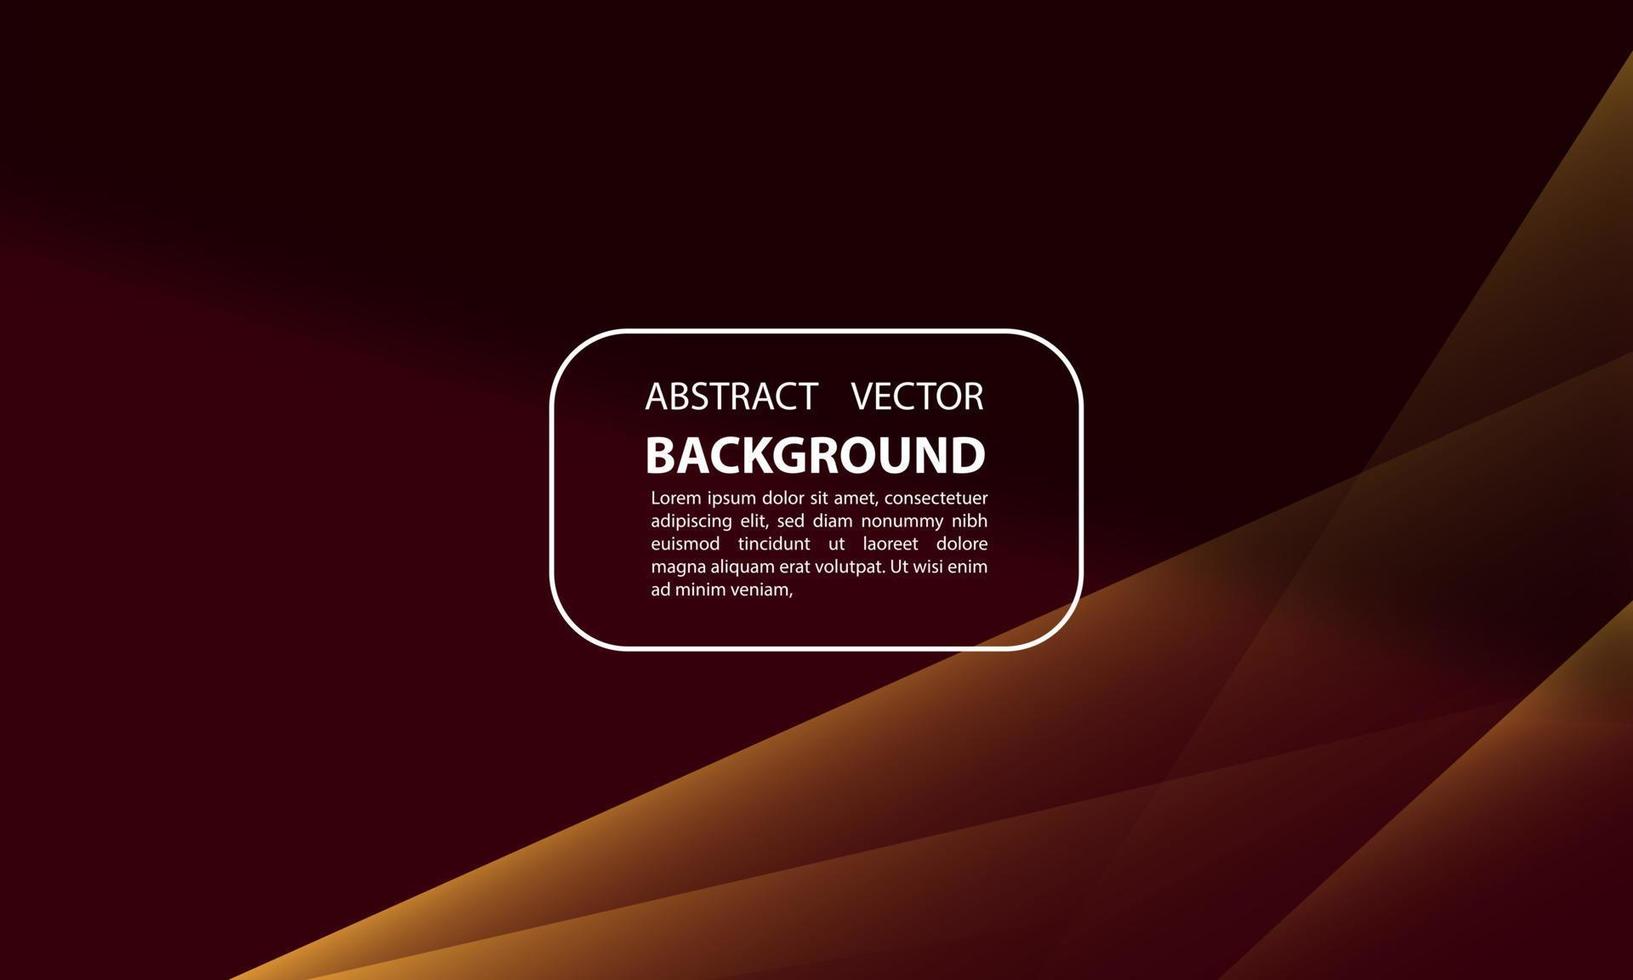 abstract background geometric gradient color maroon orange shadow overlay trendy illustration for poster banners and others, vector design eps 10